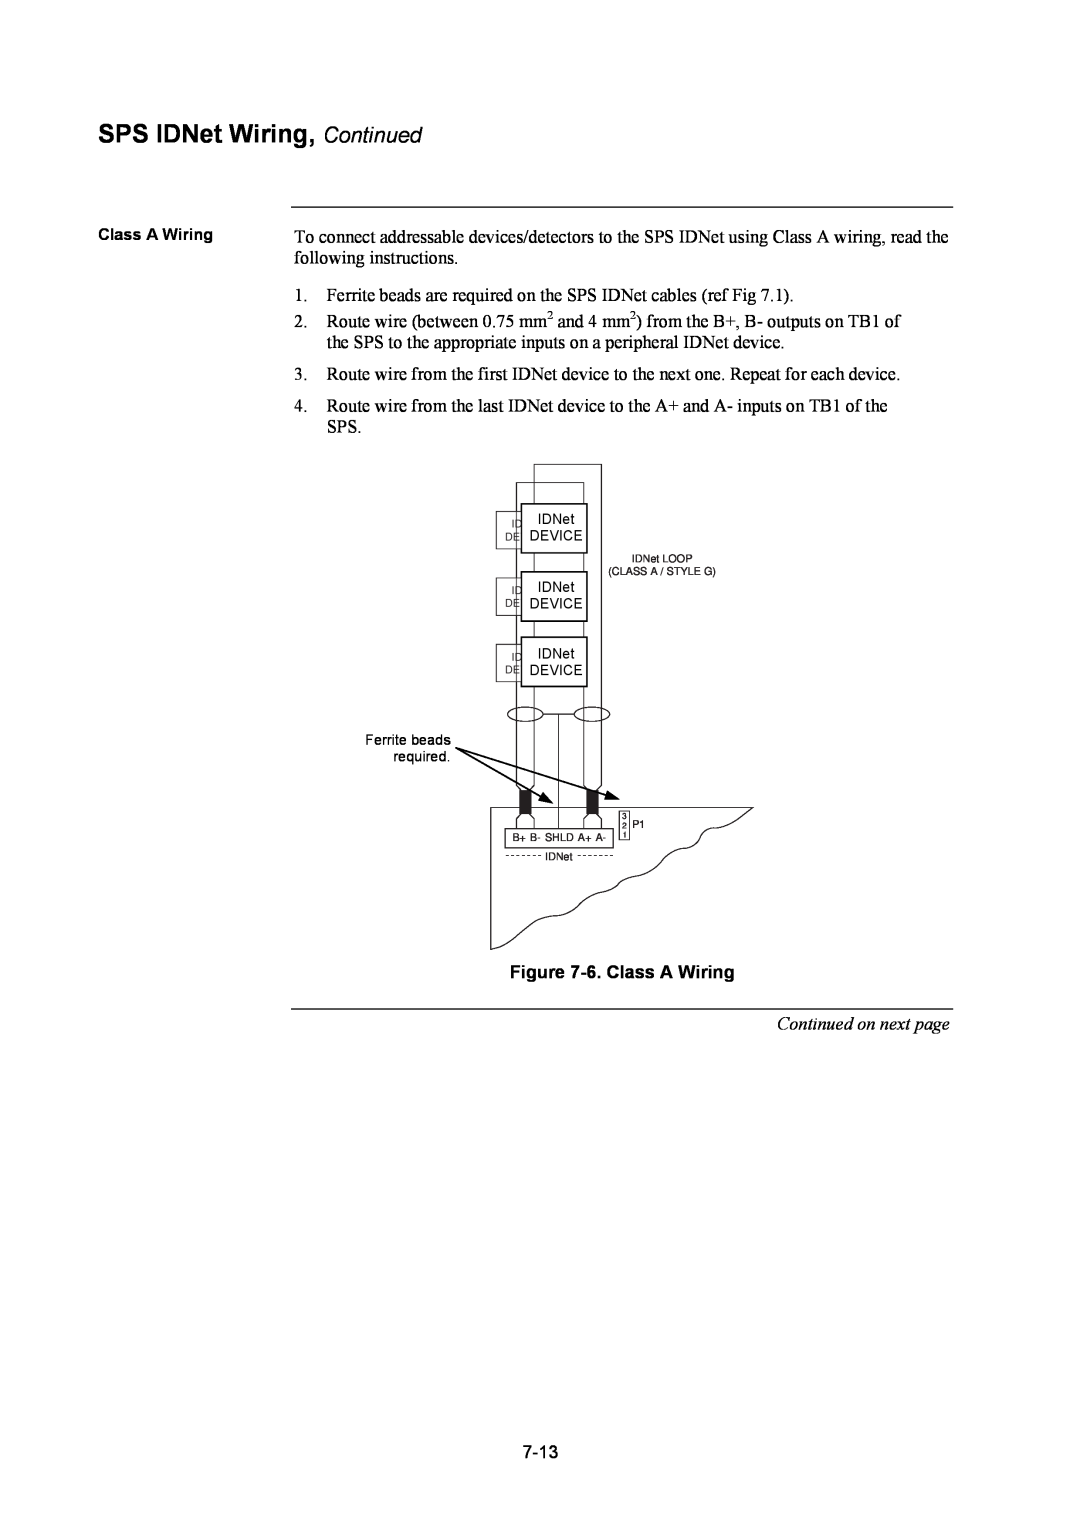 Tyco 4100U installation manual SPS IDNet Wiring, Continued, 6.Class A Wiring, Continued on next page 